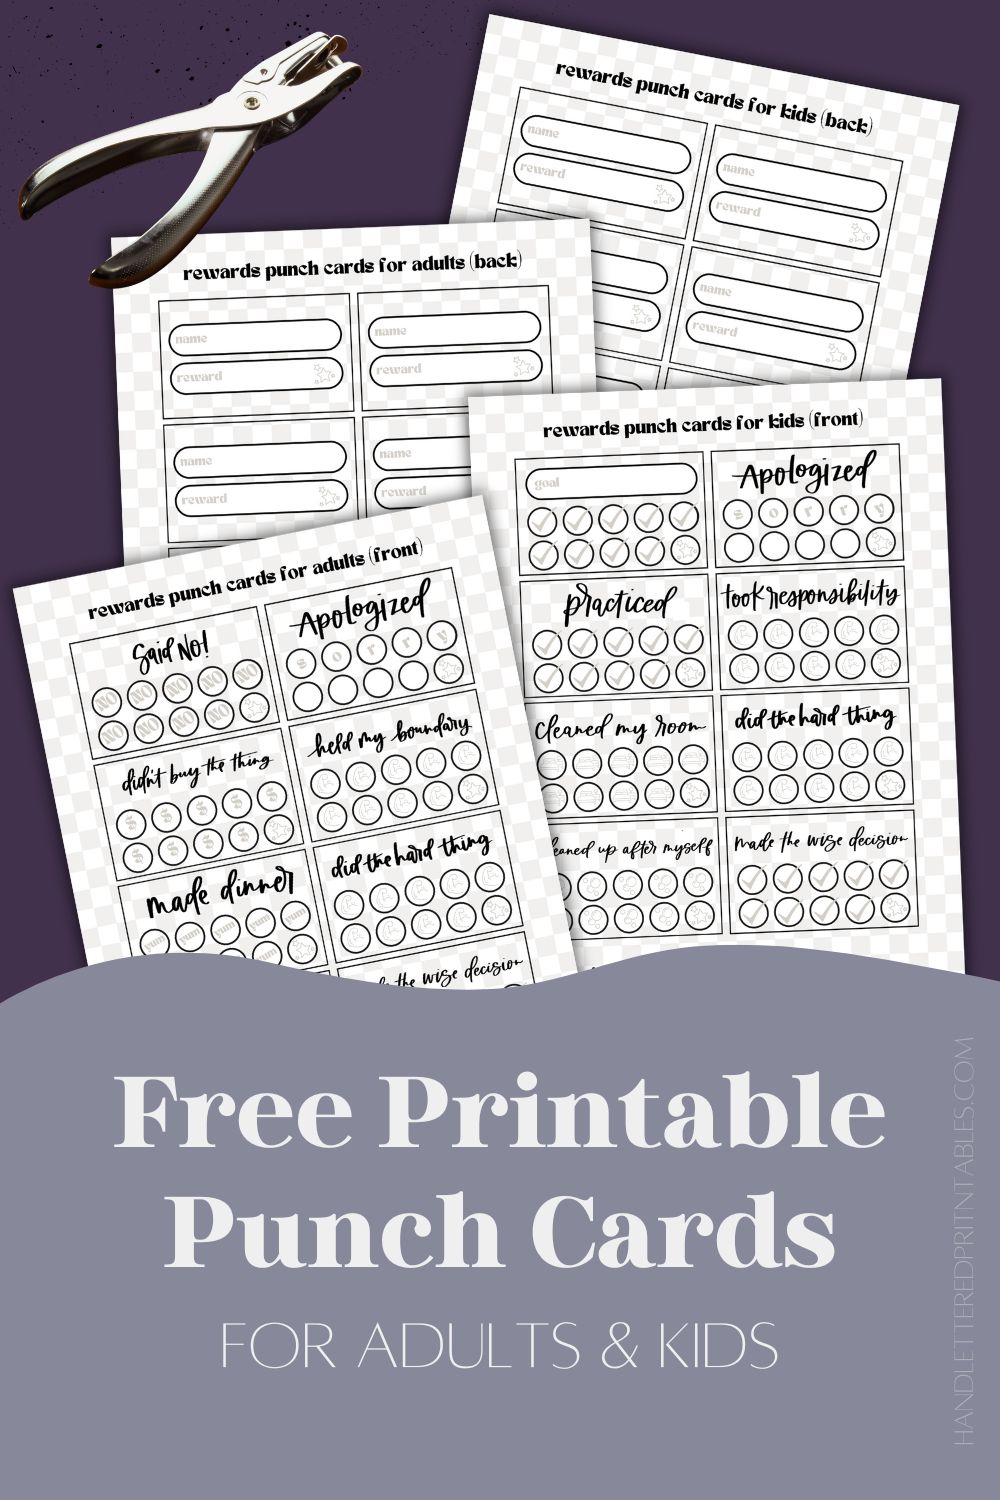 image of printable punch cards for adults and kids, ready to be cut out with scissors (8 to a page) punch cards have a soft checkerboard background with hand lettered goals like 'said no!', 'didn't buy the thing', 'made dinner', 'held my boundary' and 'made the wise decision' text over reads: free printable punch cards for adults and kids